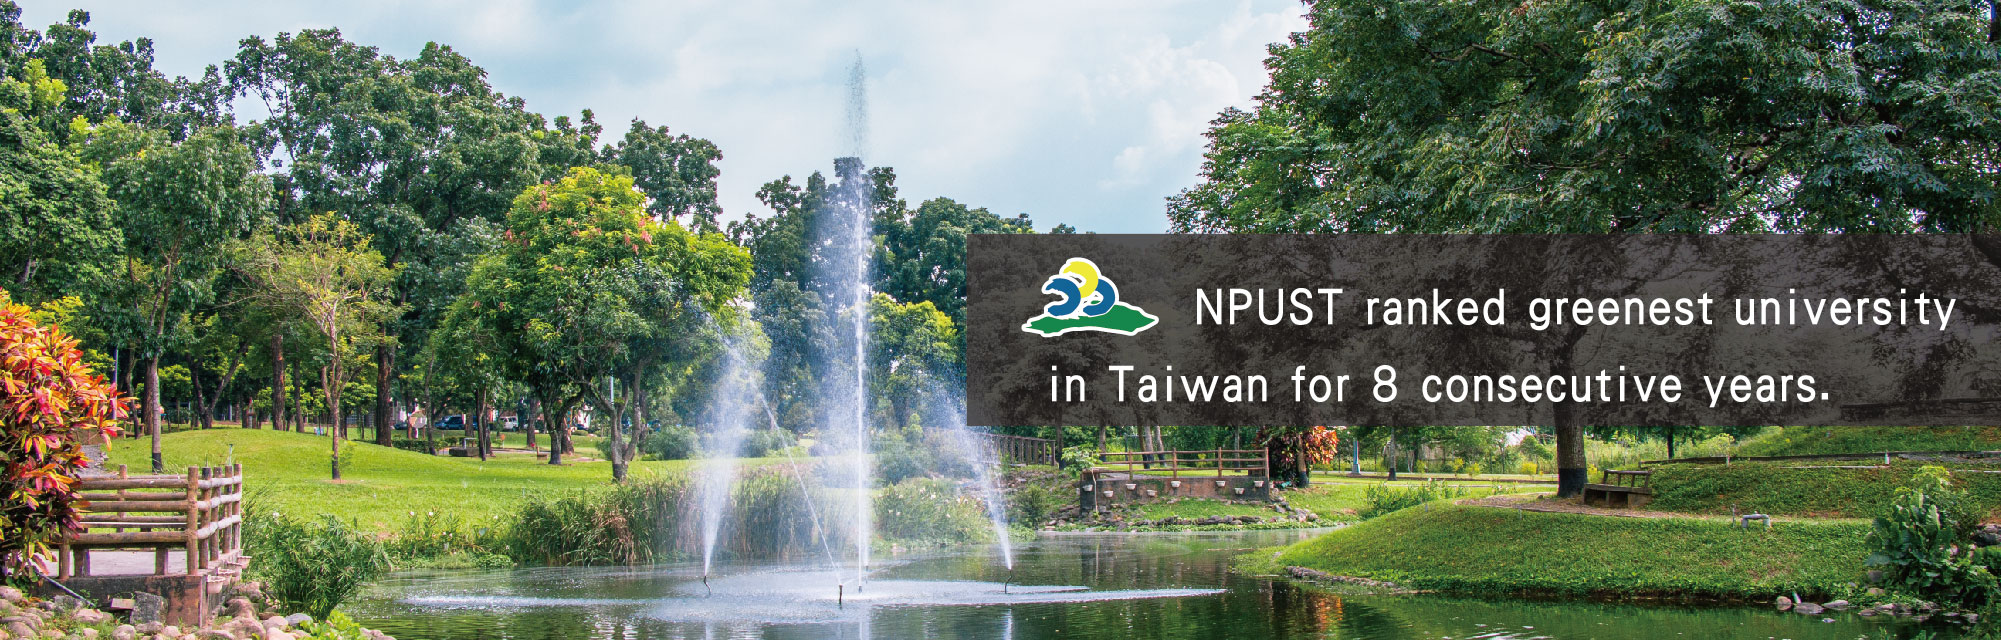 NPUST ranked greenest university in Taiwan for 7 consecutive years